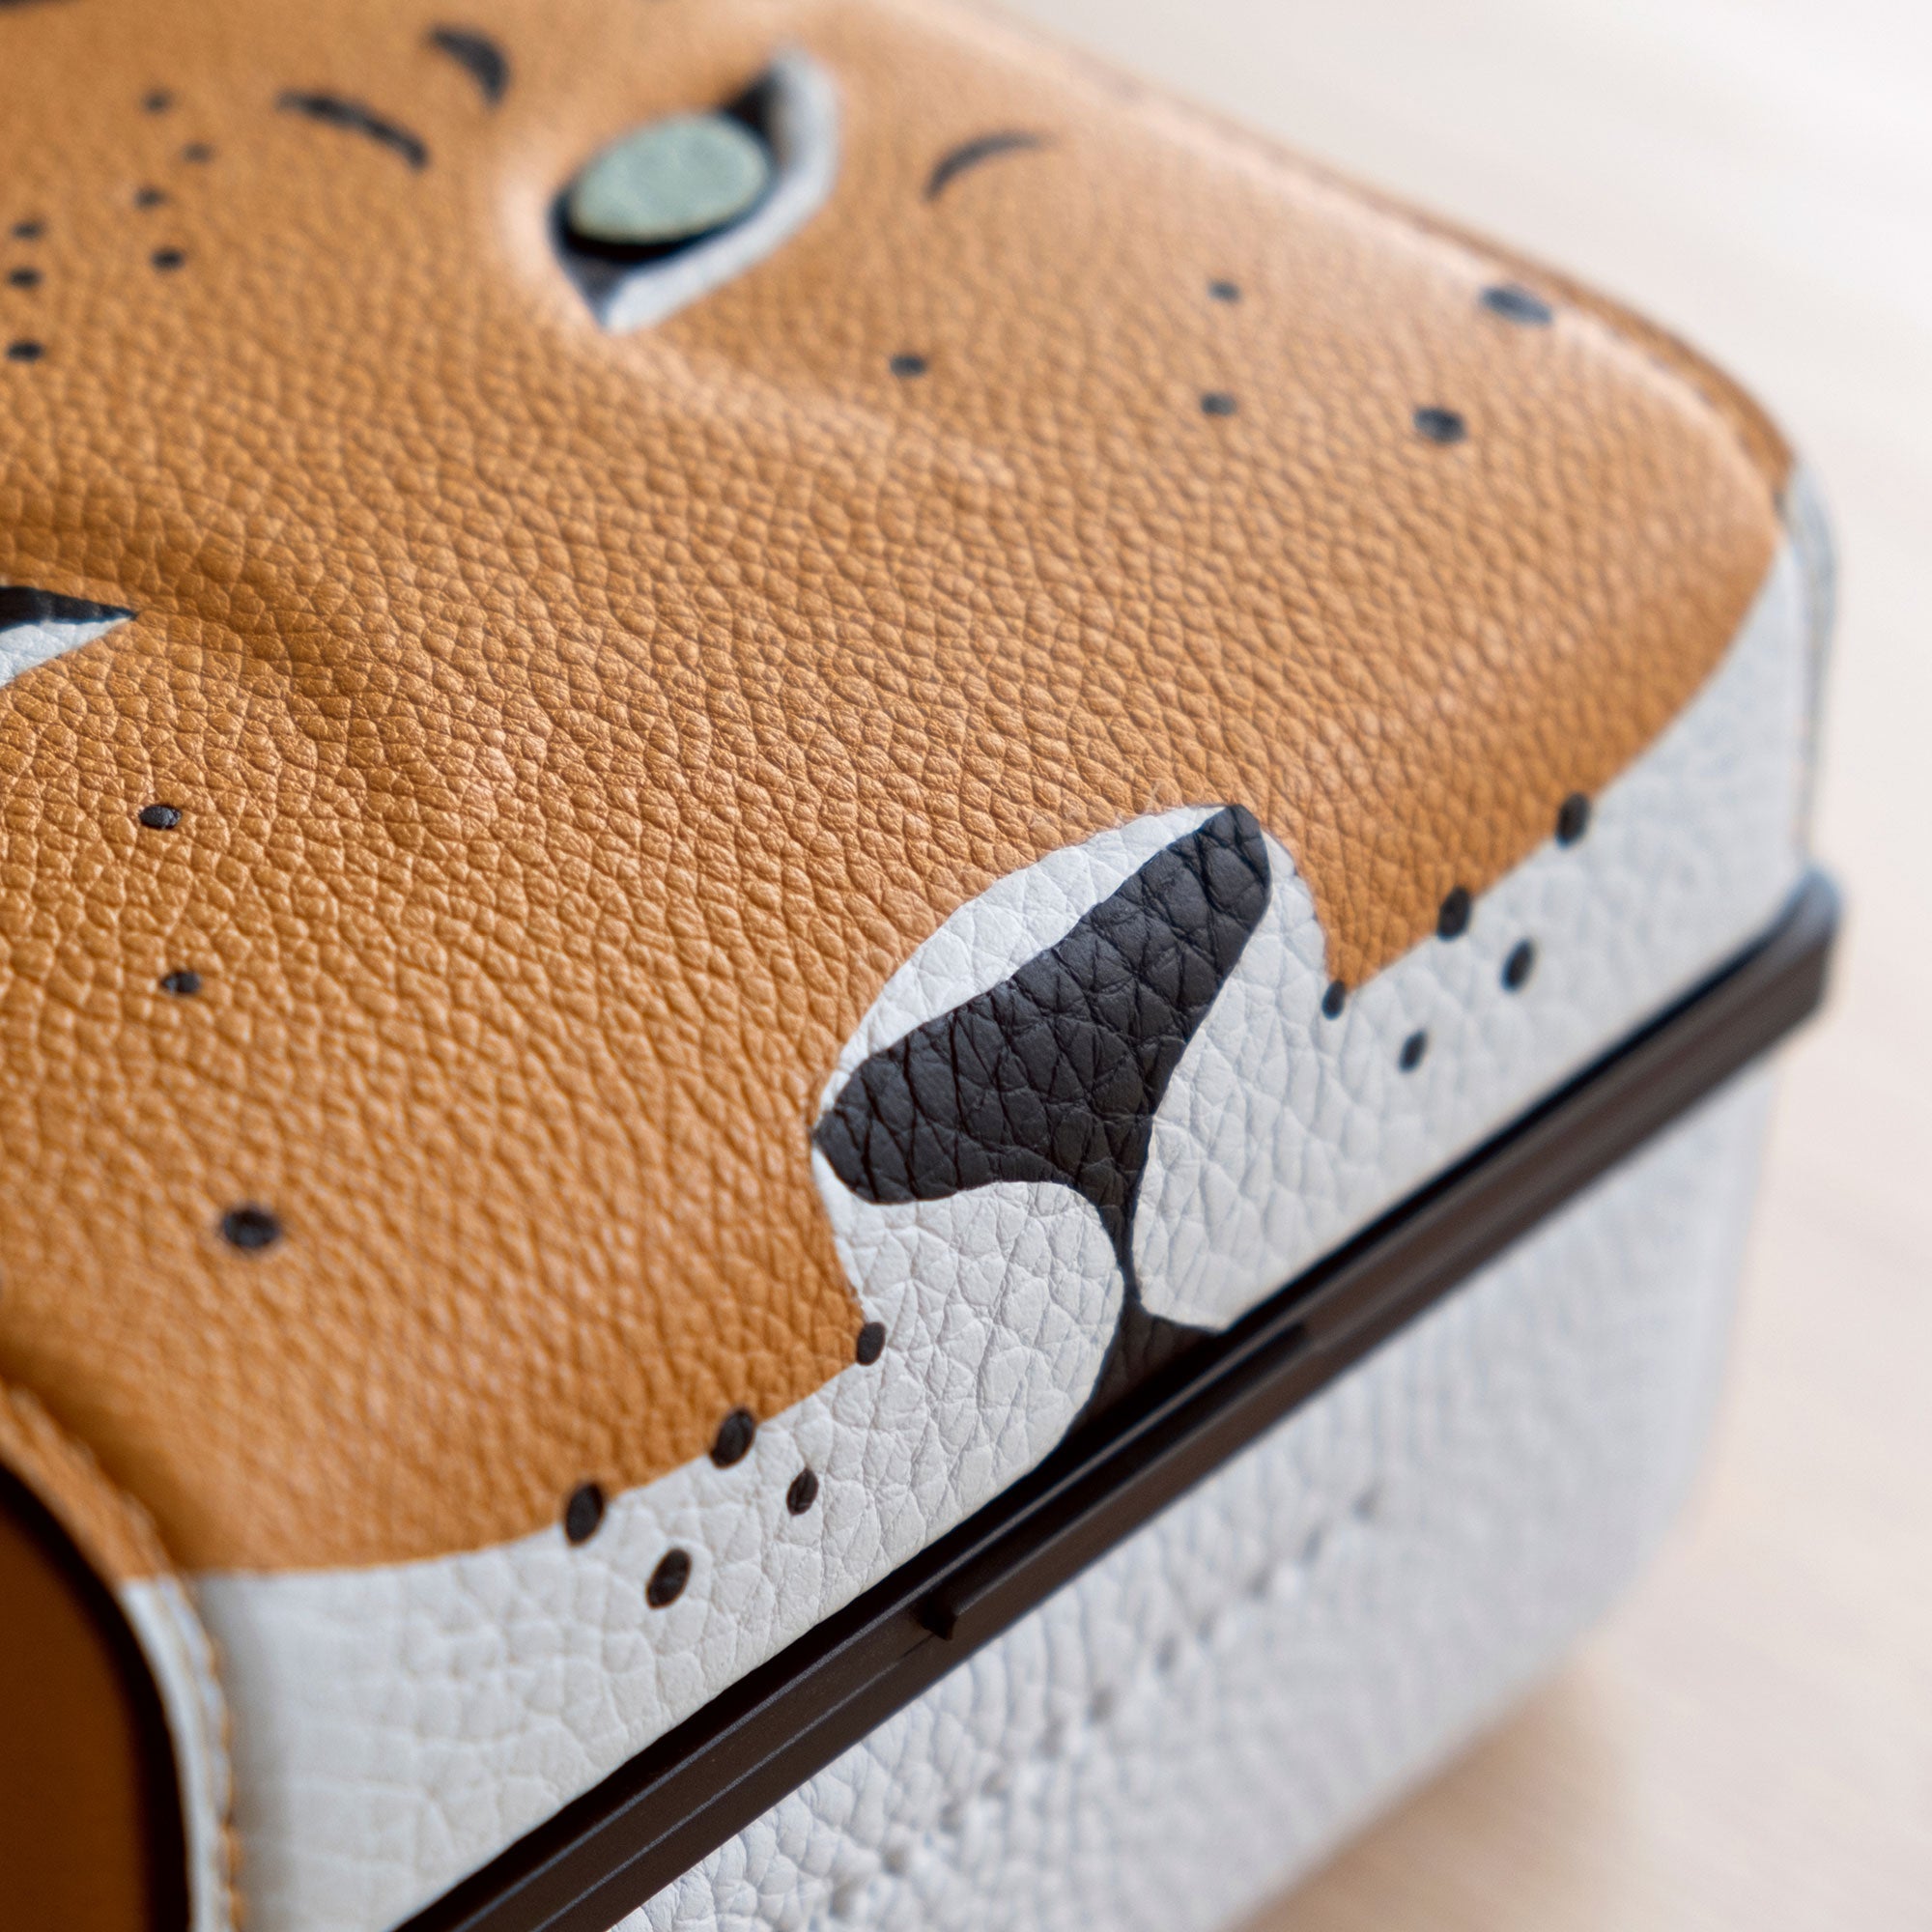 Detail photo of leopard snout and face of the handmade Special Edition Eaton 1 Leopard Watch case